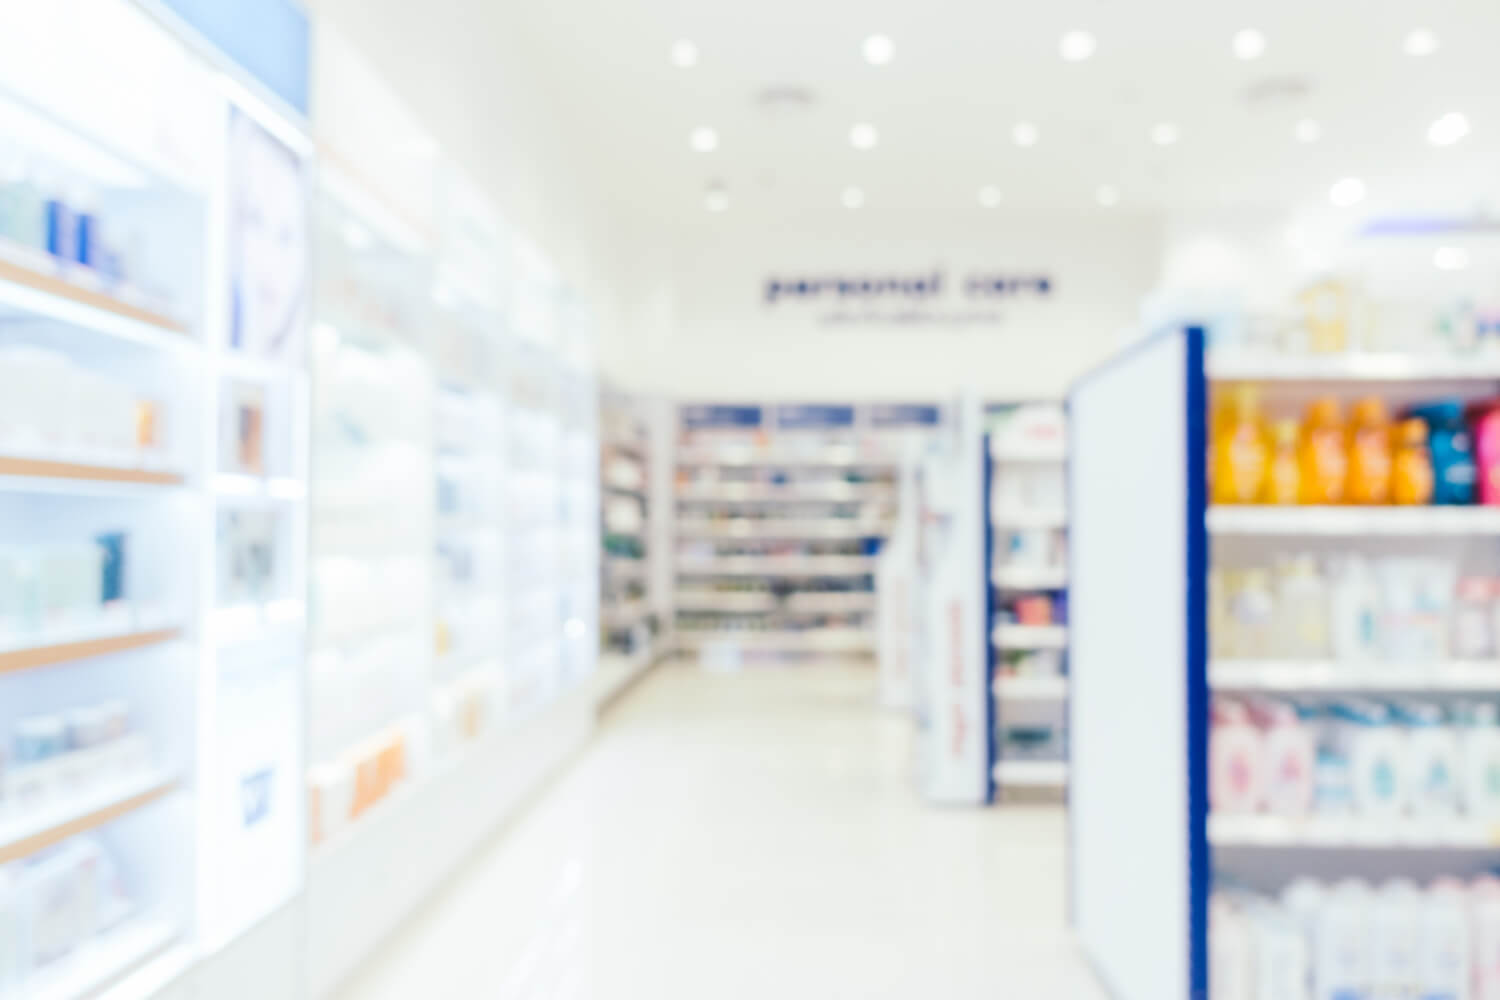 Out patient pharmacy - How to improve healthcare quality?